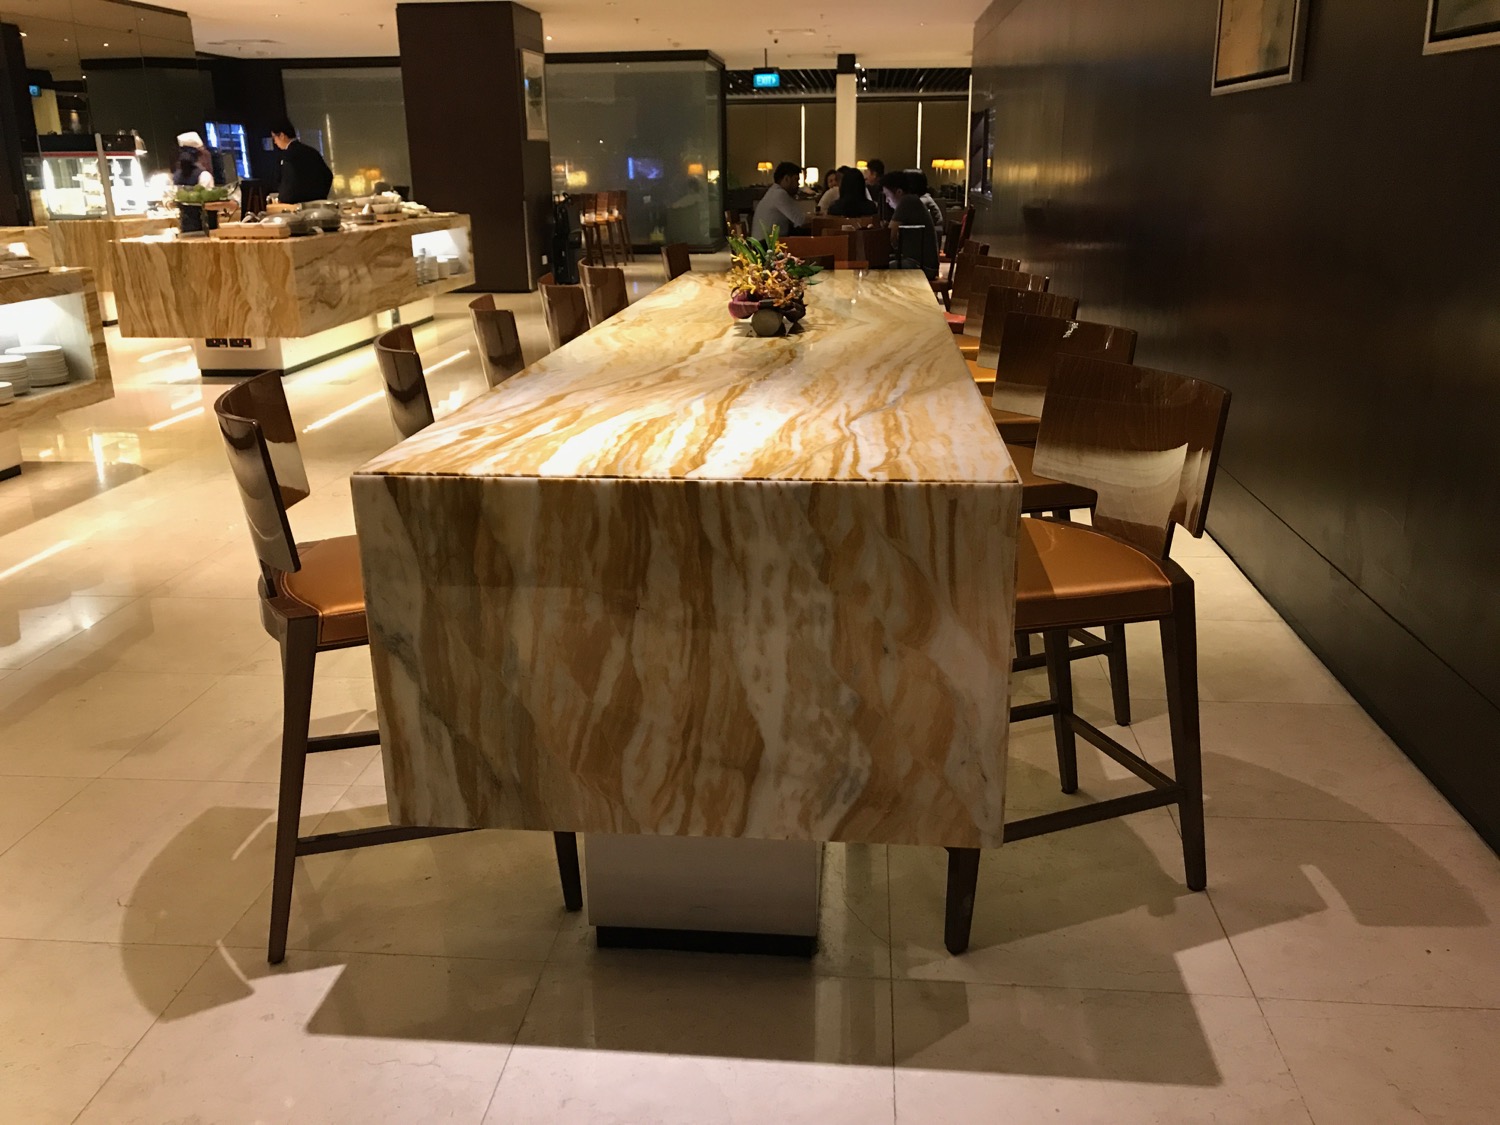 a large marble table with chairs in a room with people